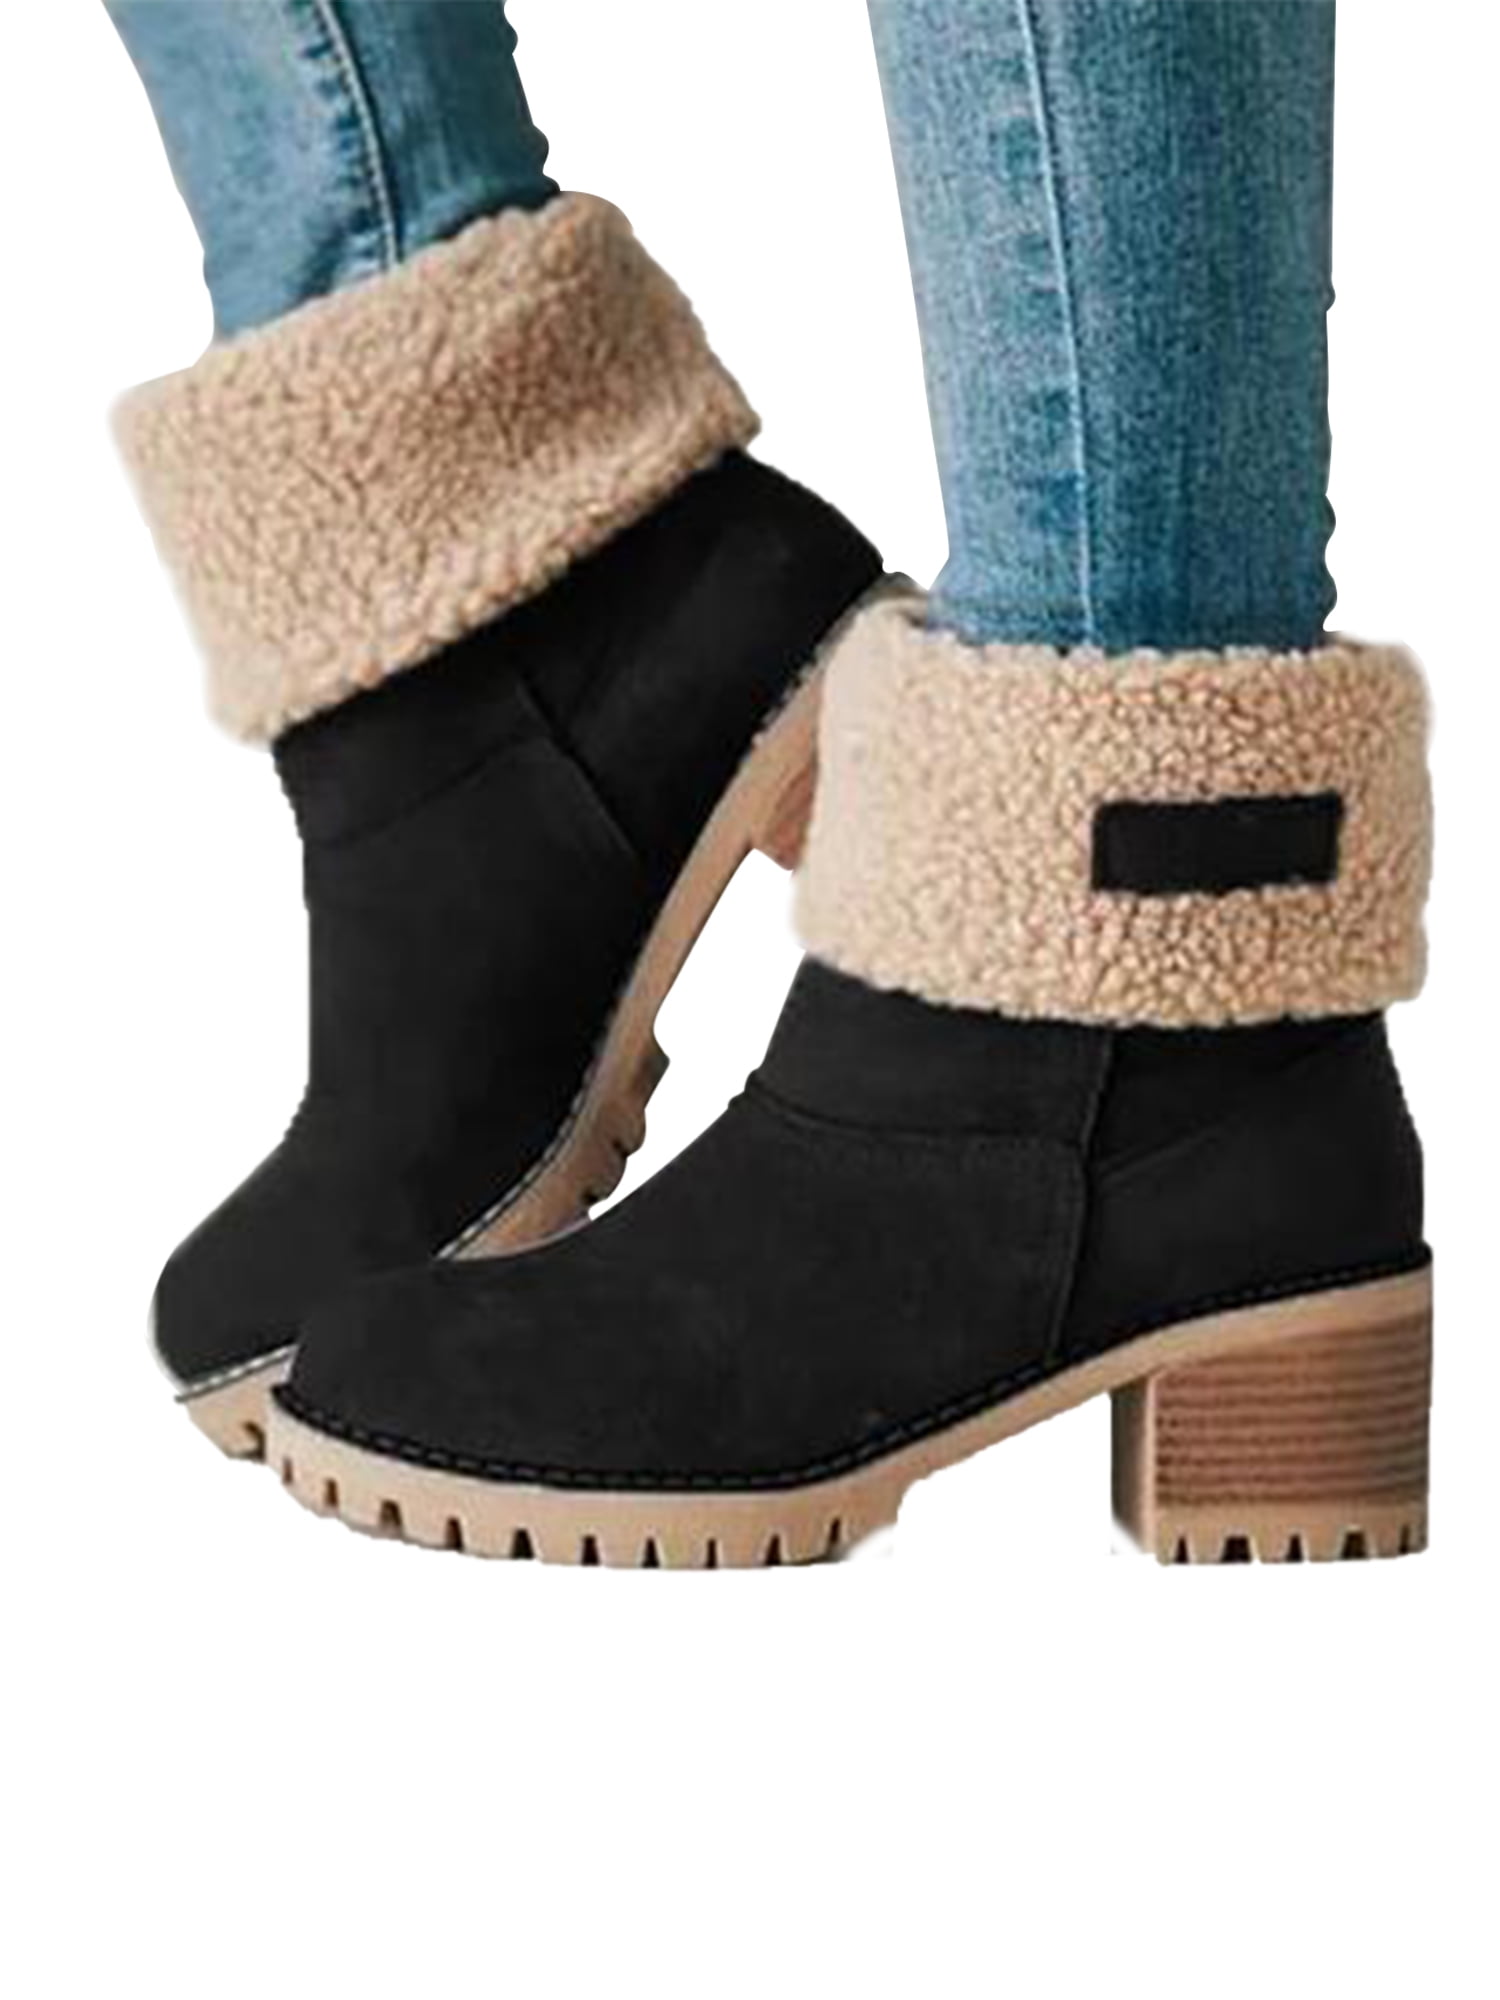 Harsuny Women Cute Warm Short Boots Suede Chunky Mid Heel Round Toe ...